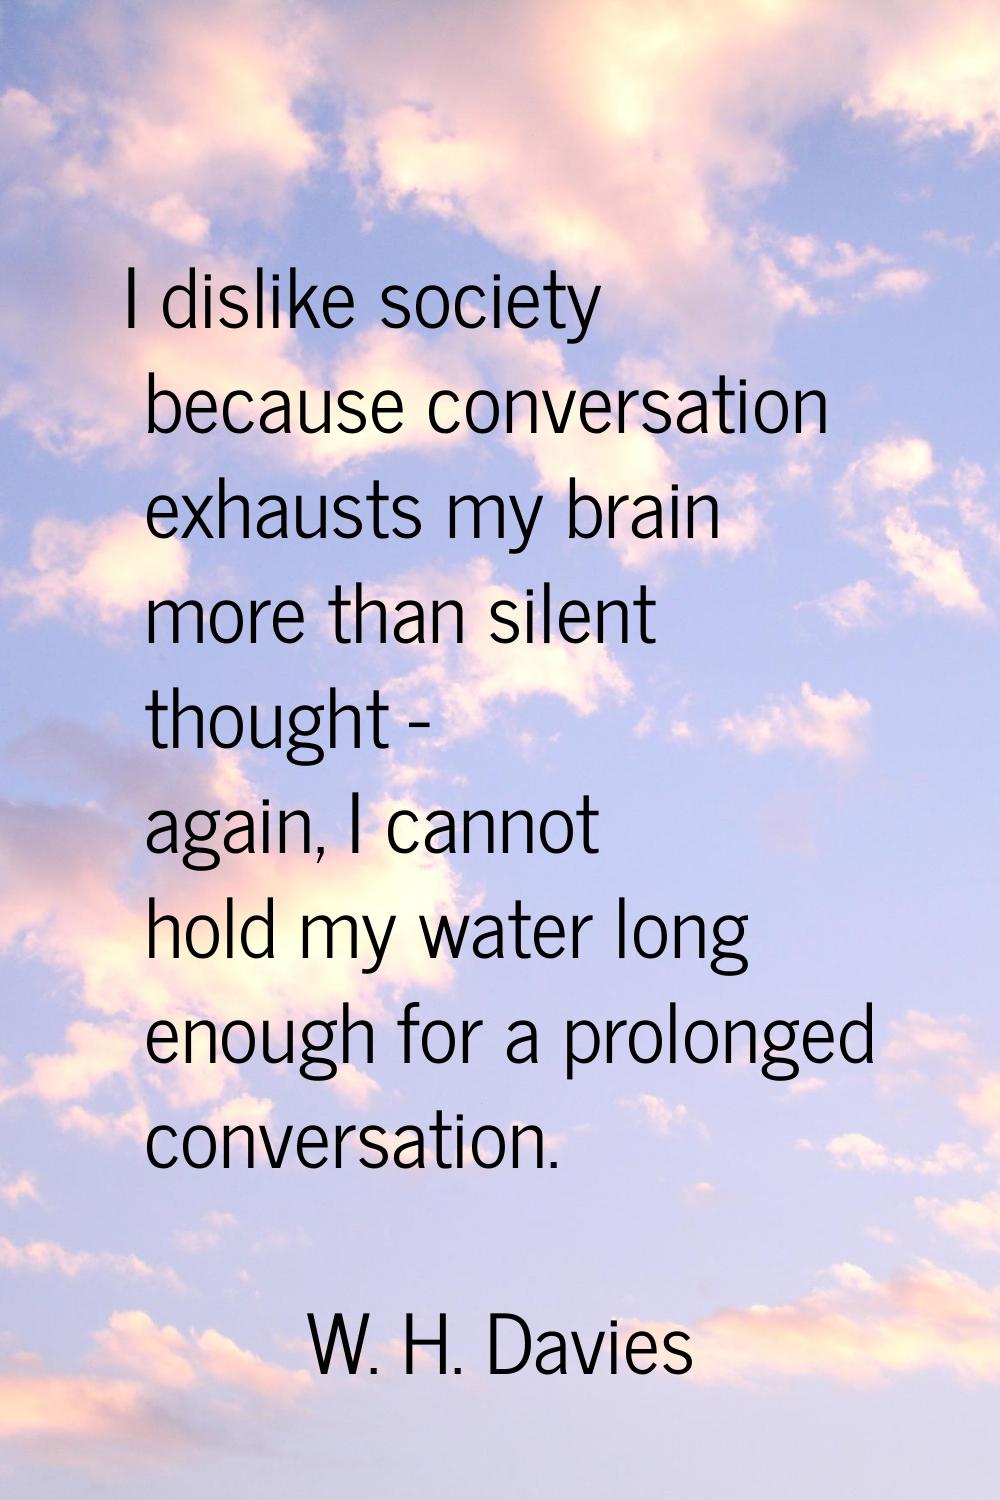 I dislike society because conversation exhausts my brain more than silent thought - again, I cannot